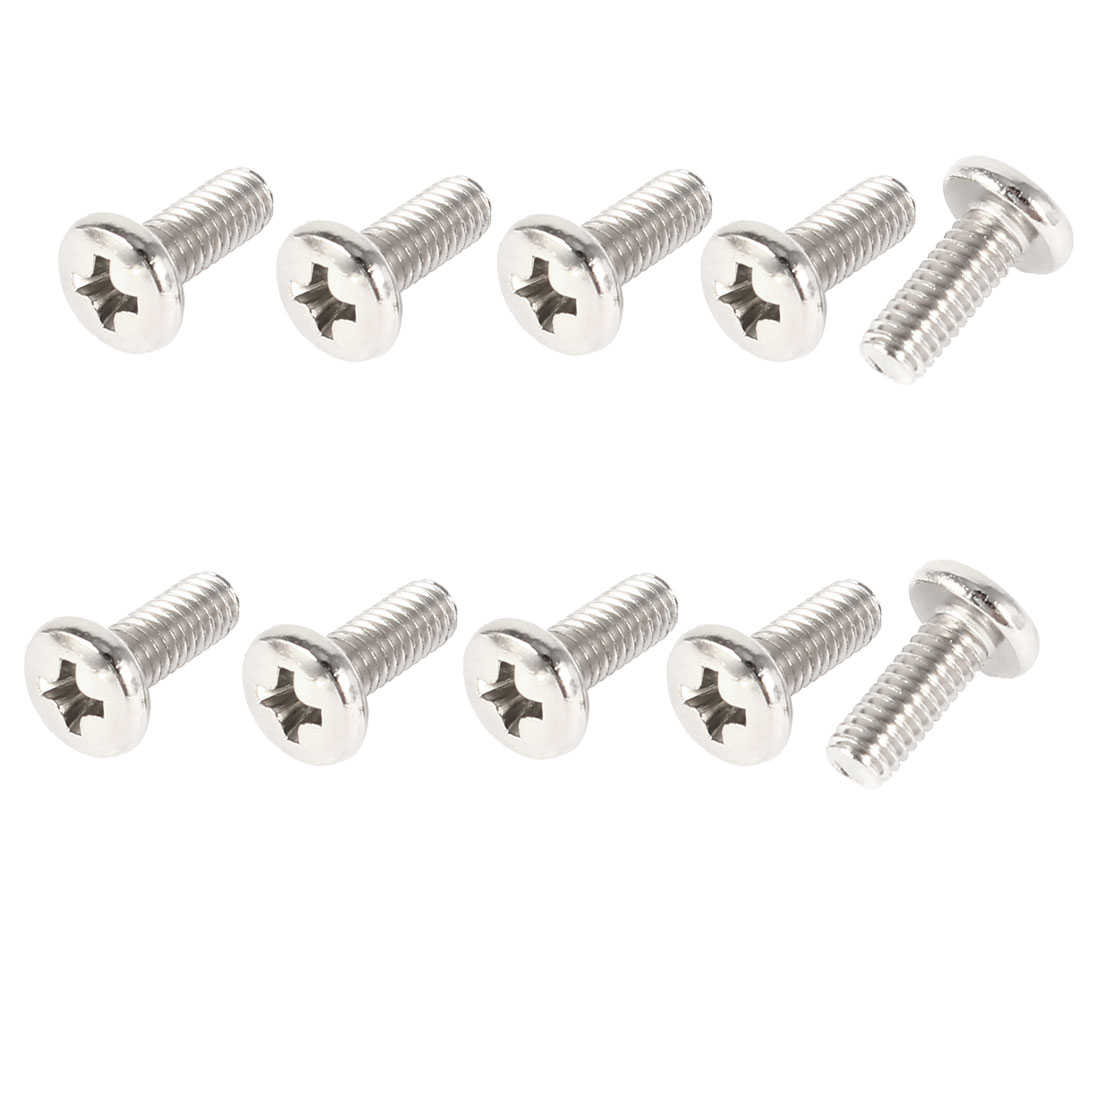 Unique Bargains Computer LCD Monitor Stand Bracket Stainless Steel Mounting Screw M4x10mm 10 Pcs